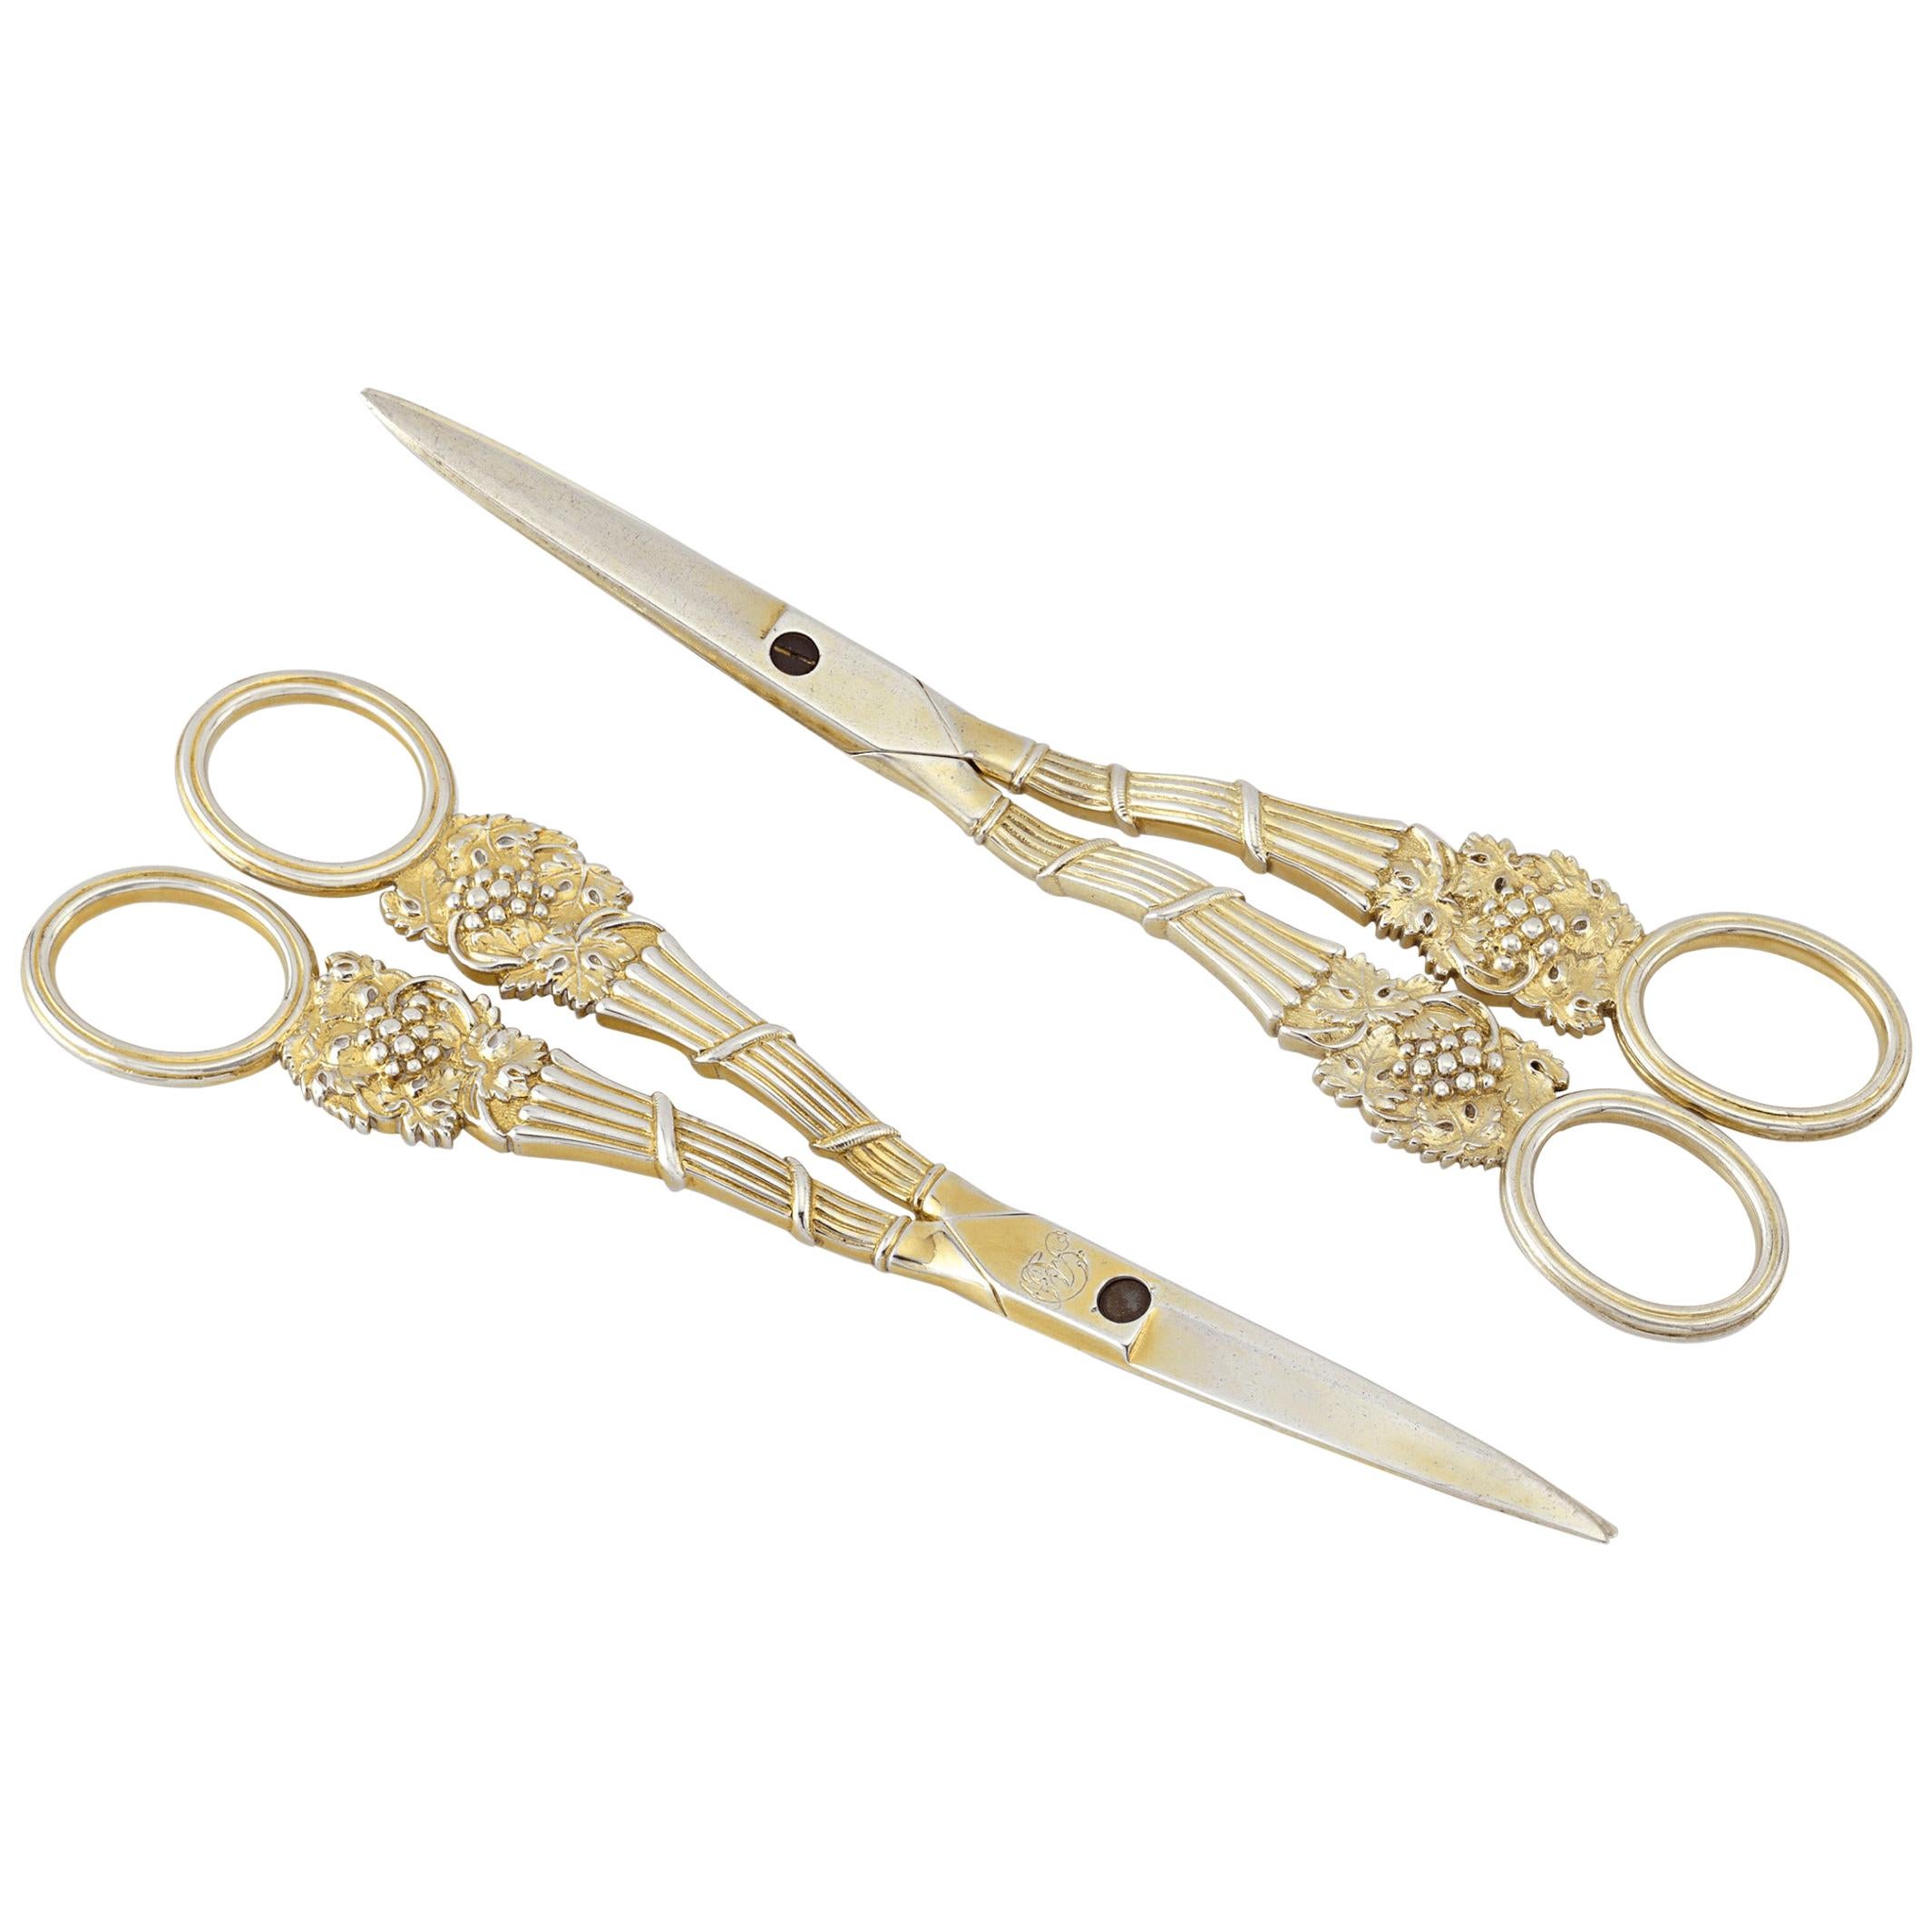 Two Pairs of Regency-Period Silver-Gilt Grape Shears